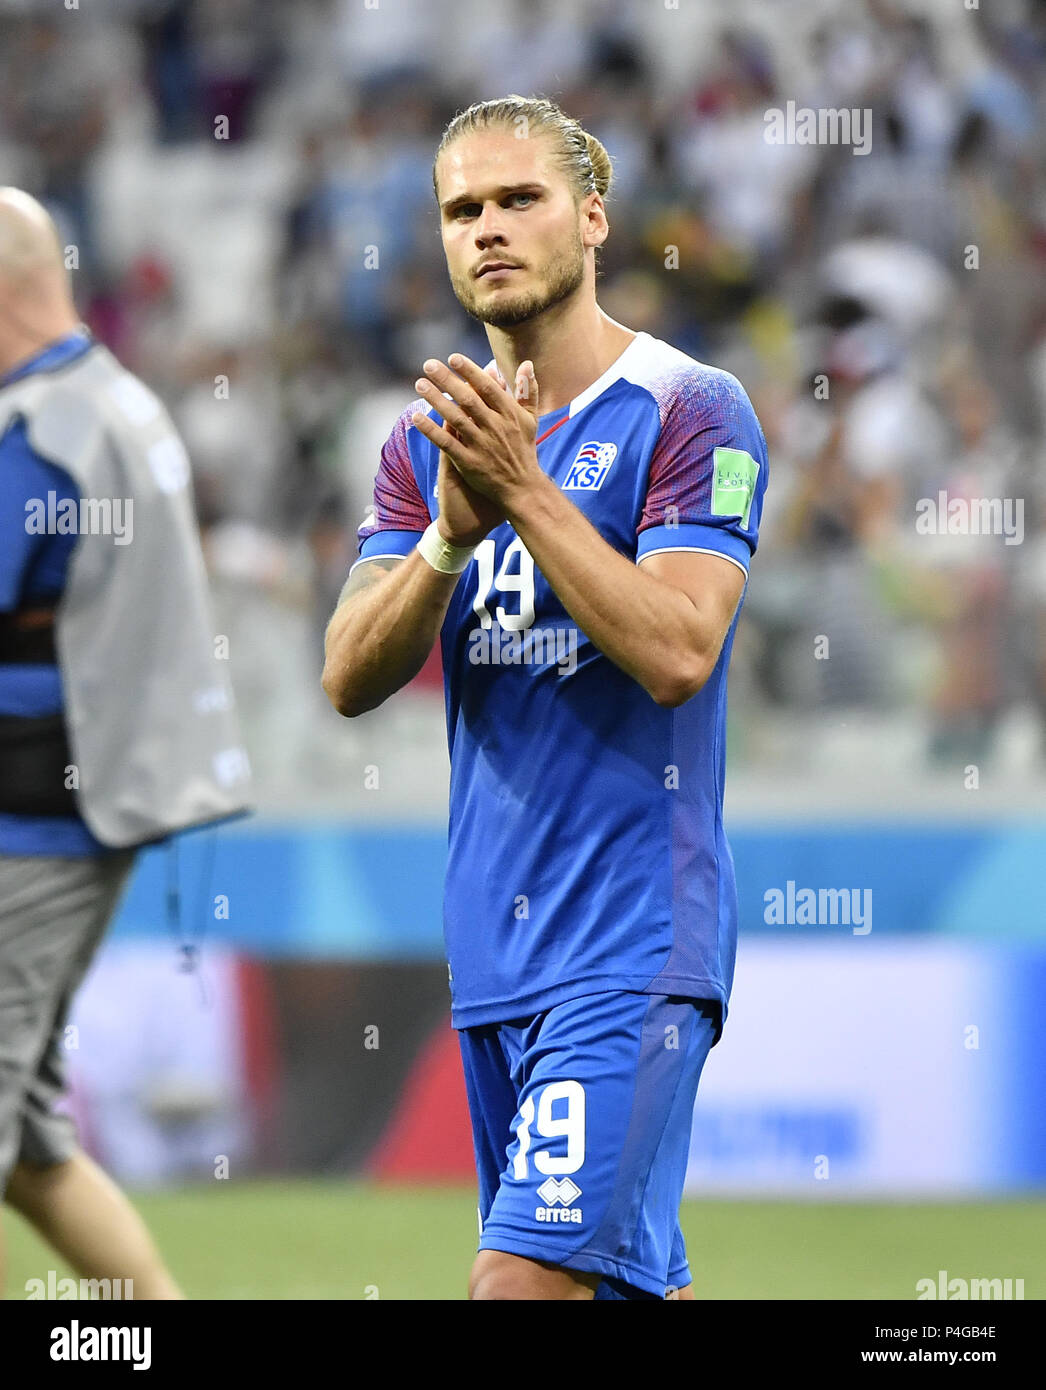 Volgograd, Russia. 22nd June, 2018. Rurik Gislason of Iceland greets the audience after the 2018 FIFA World Cup Group D match between Nigeria and Iceland in Volgograd, Russia, June 22, 2018. Nigeria won 2-0. Credit: He Canling/Xinhua/Alamy Live News Stock Photo